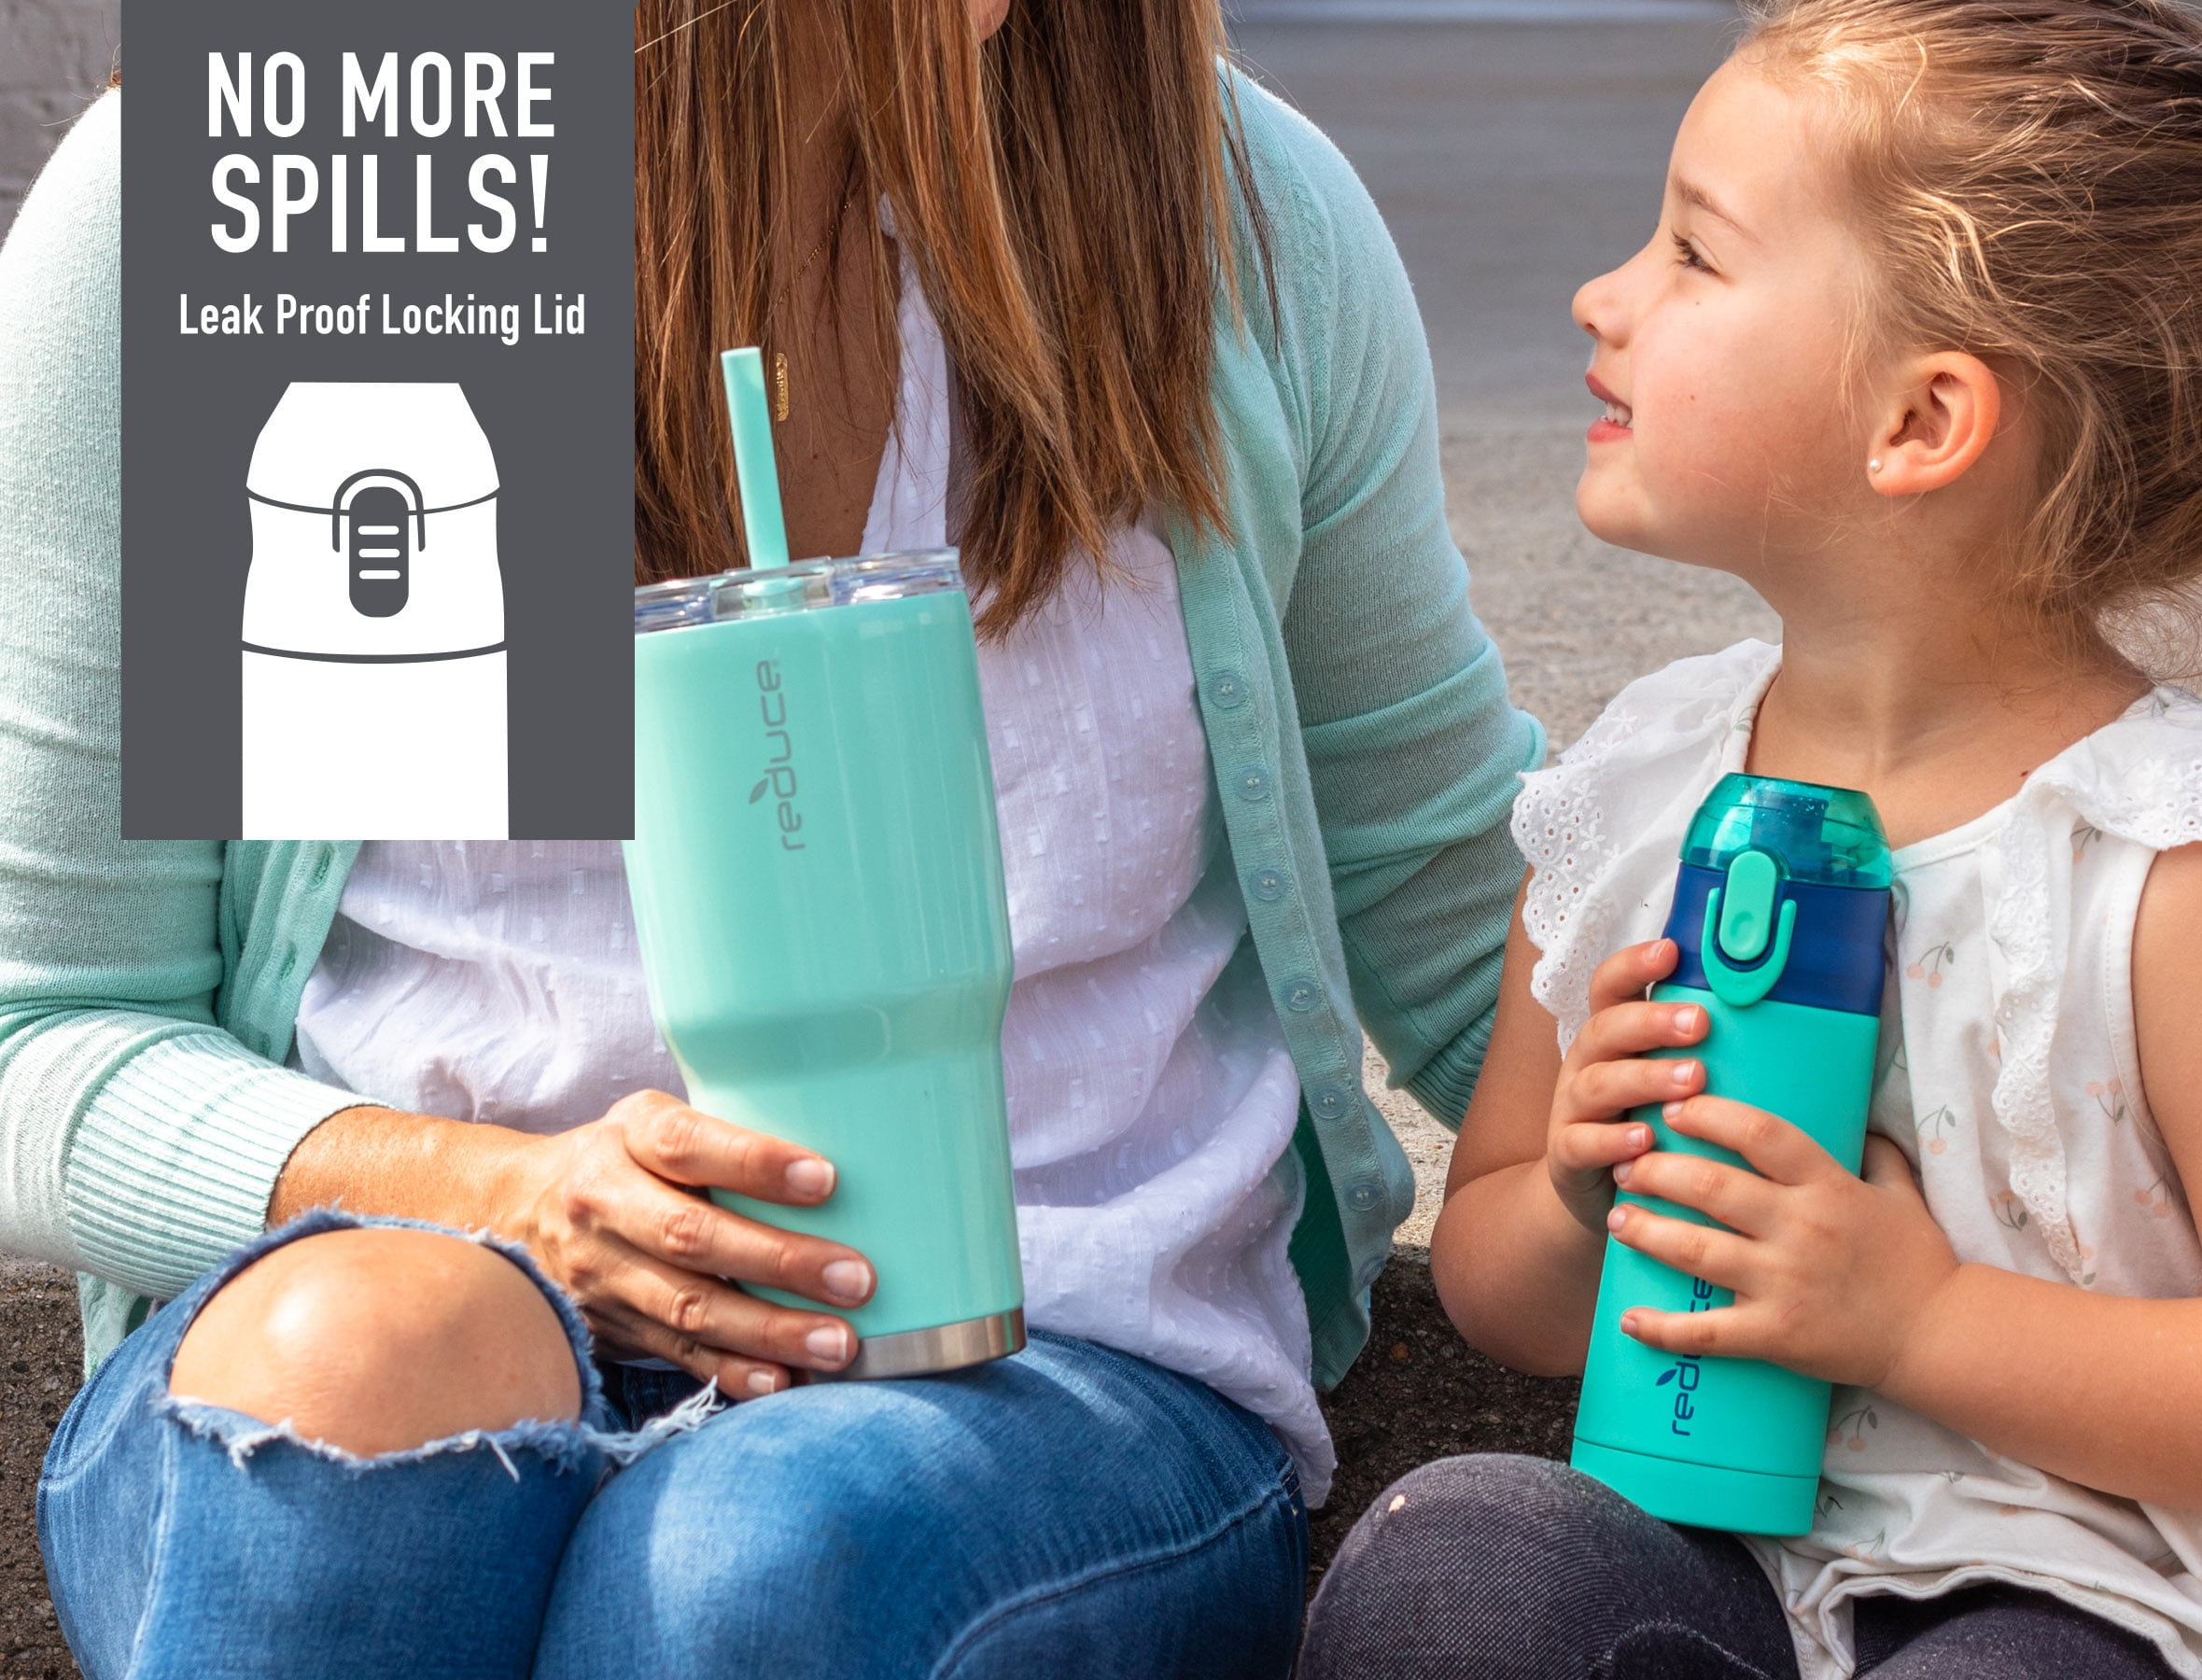 Reduce Water Bottle – Frostee Insulated Bottle For Kids, 13 oz – Vacuum  Insulated, Cold for 12 Hours – With Leak Proof and Hygienic Flip Top Lid –  Morning Ray, Easy Grip Finish 